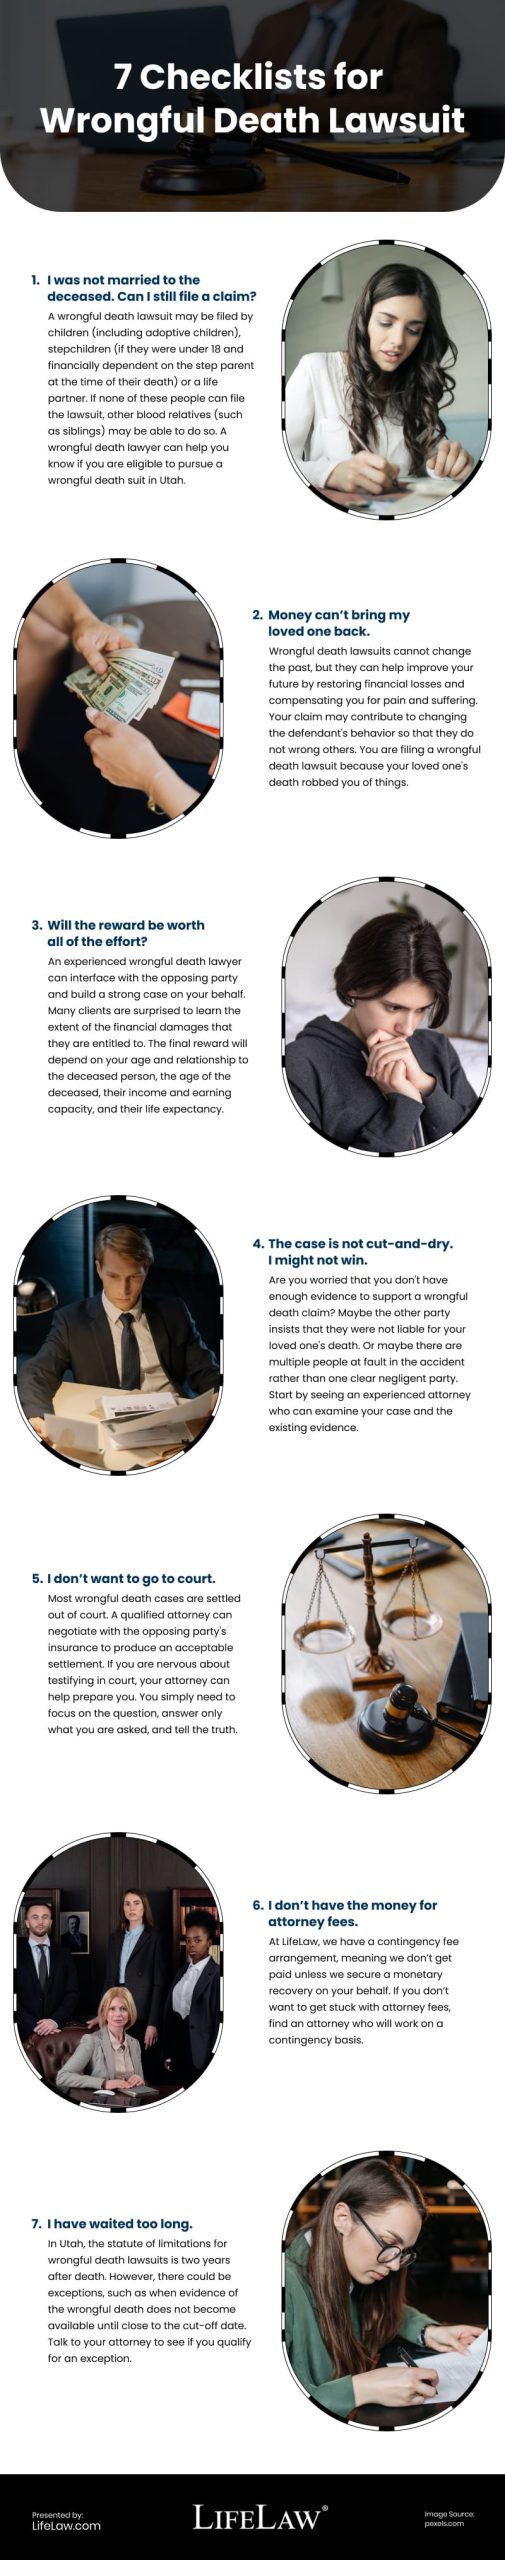 7 Checklists for Wrongful Death Lawsuit Infographic